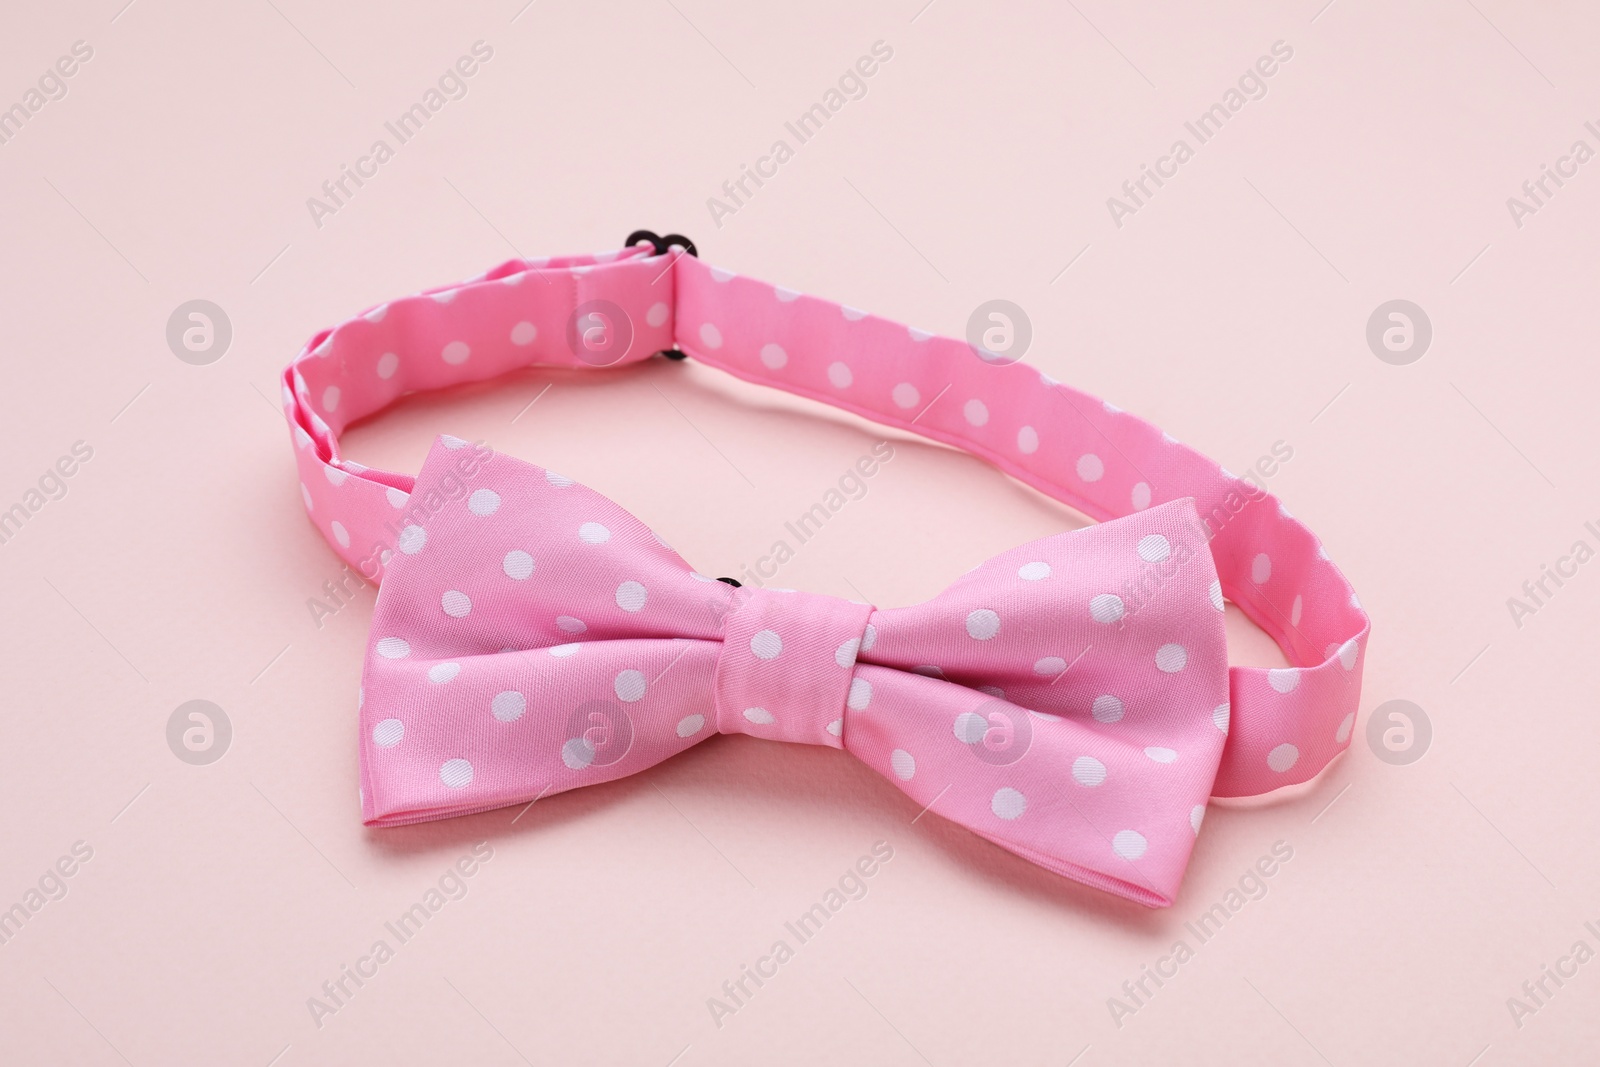 Photo of Stylish pink bow tie with polka dot pattern on beige background